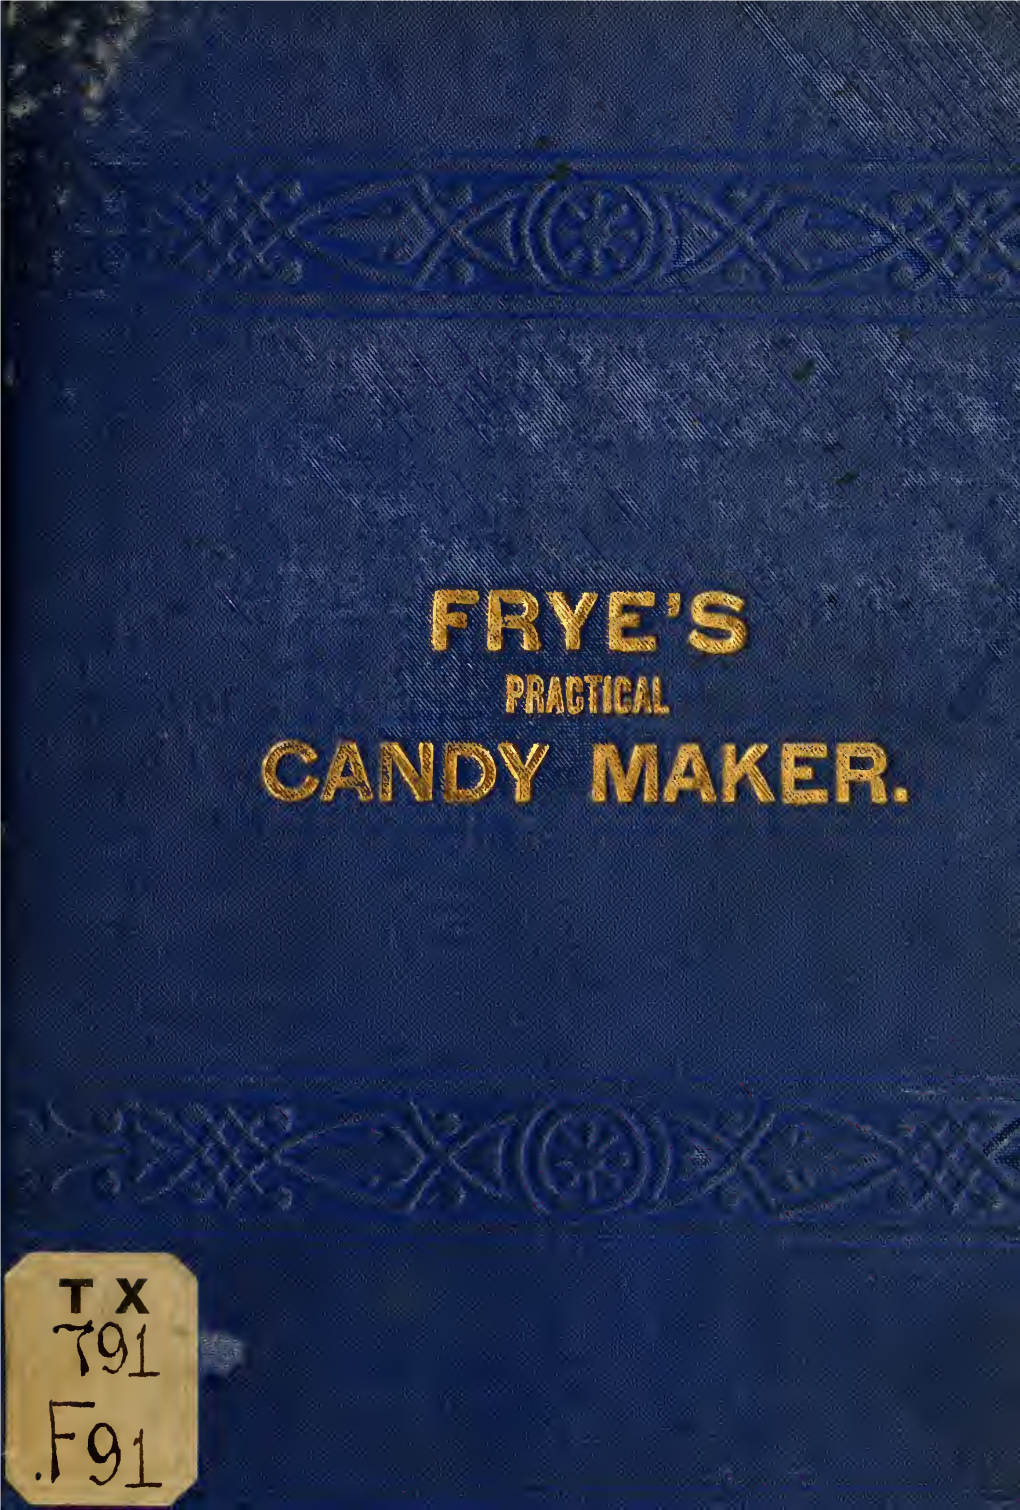 Frye's Practical Candy Maker